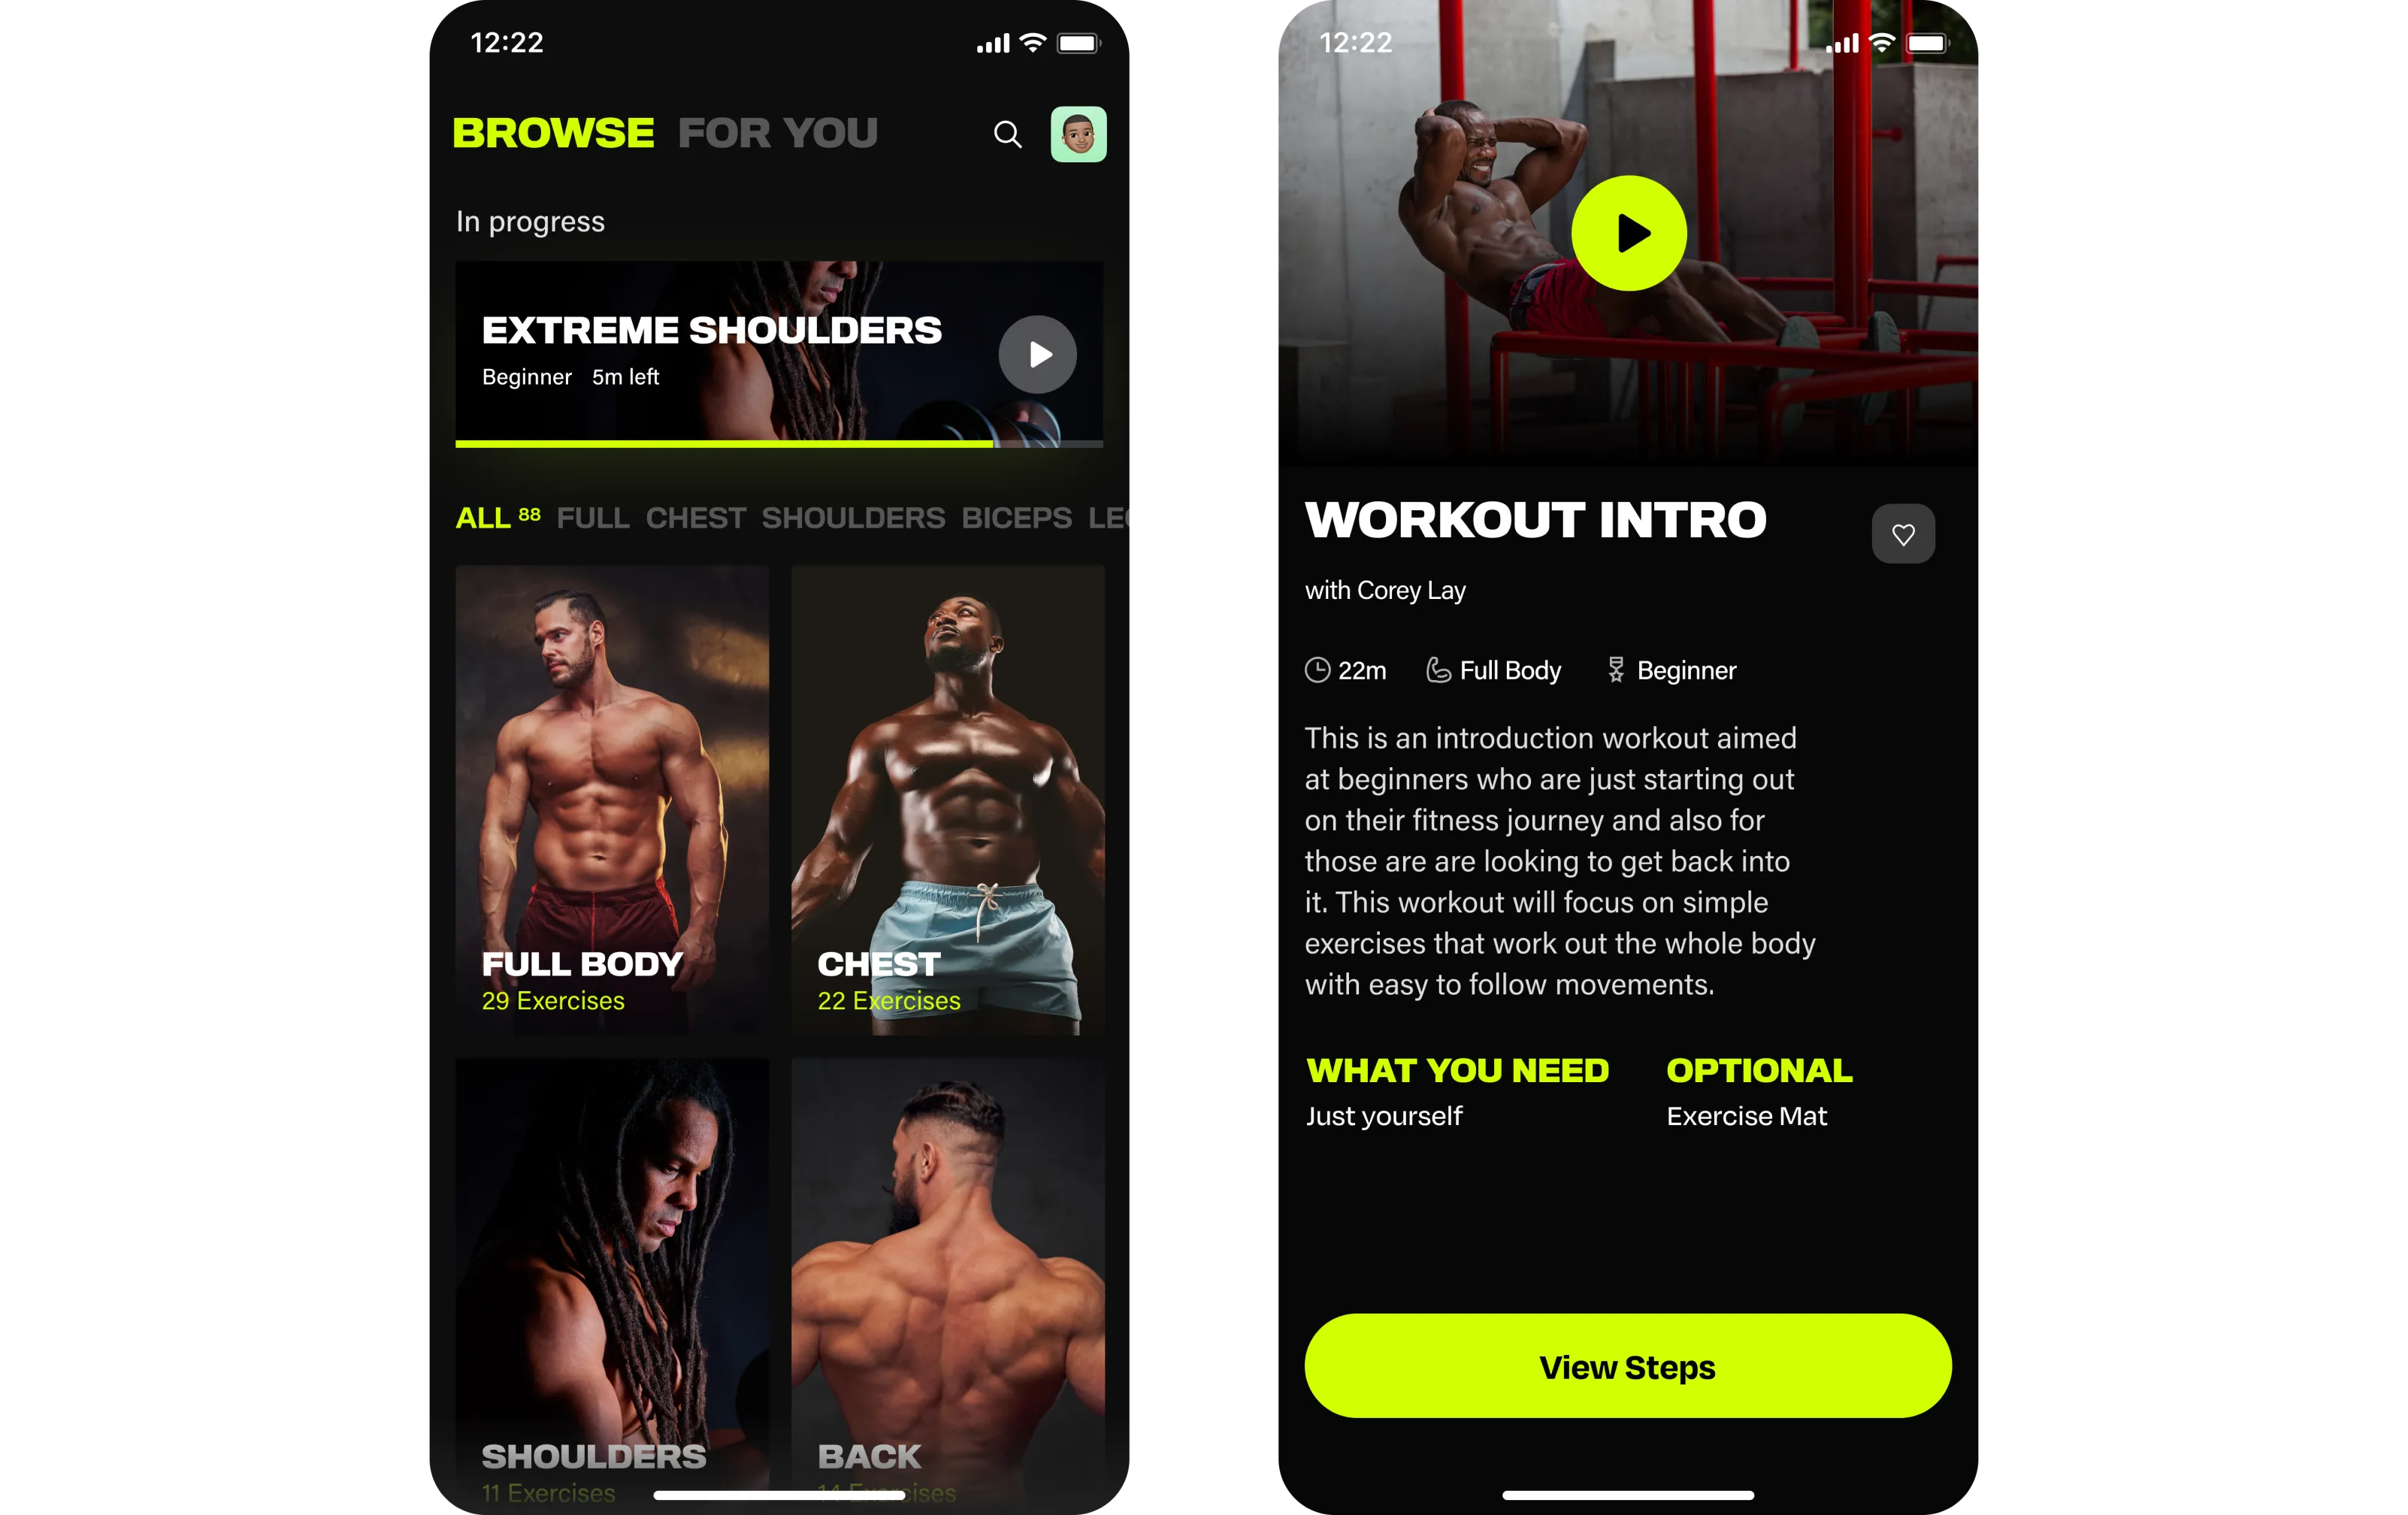 Two mobile UI screens for a workout app